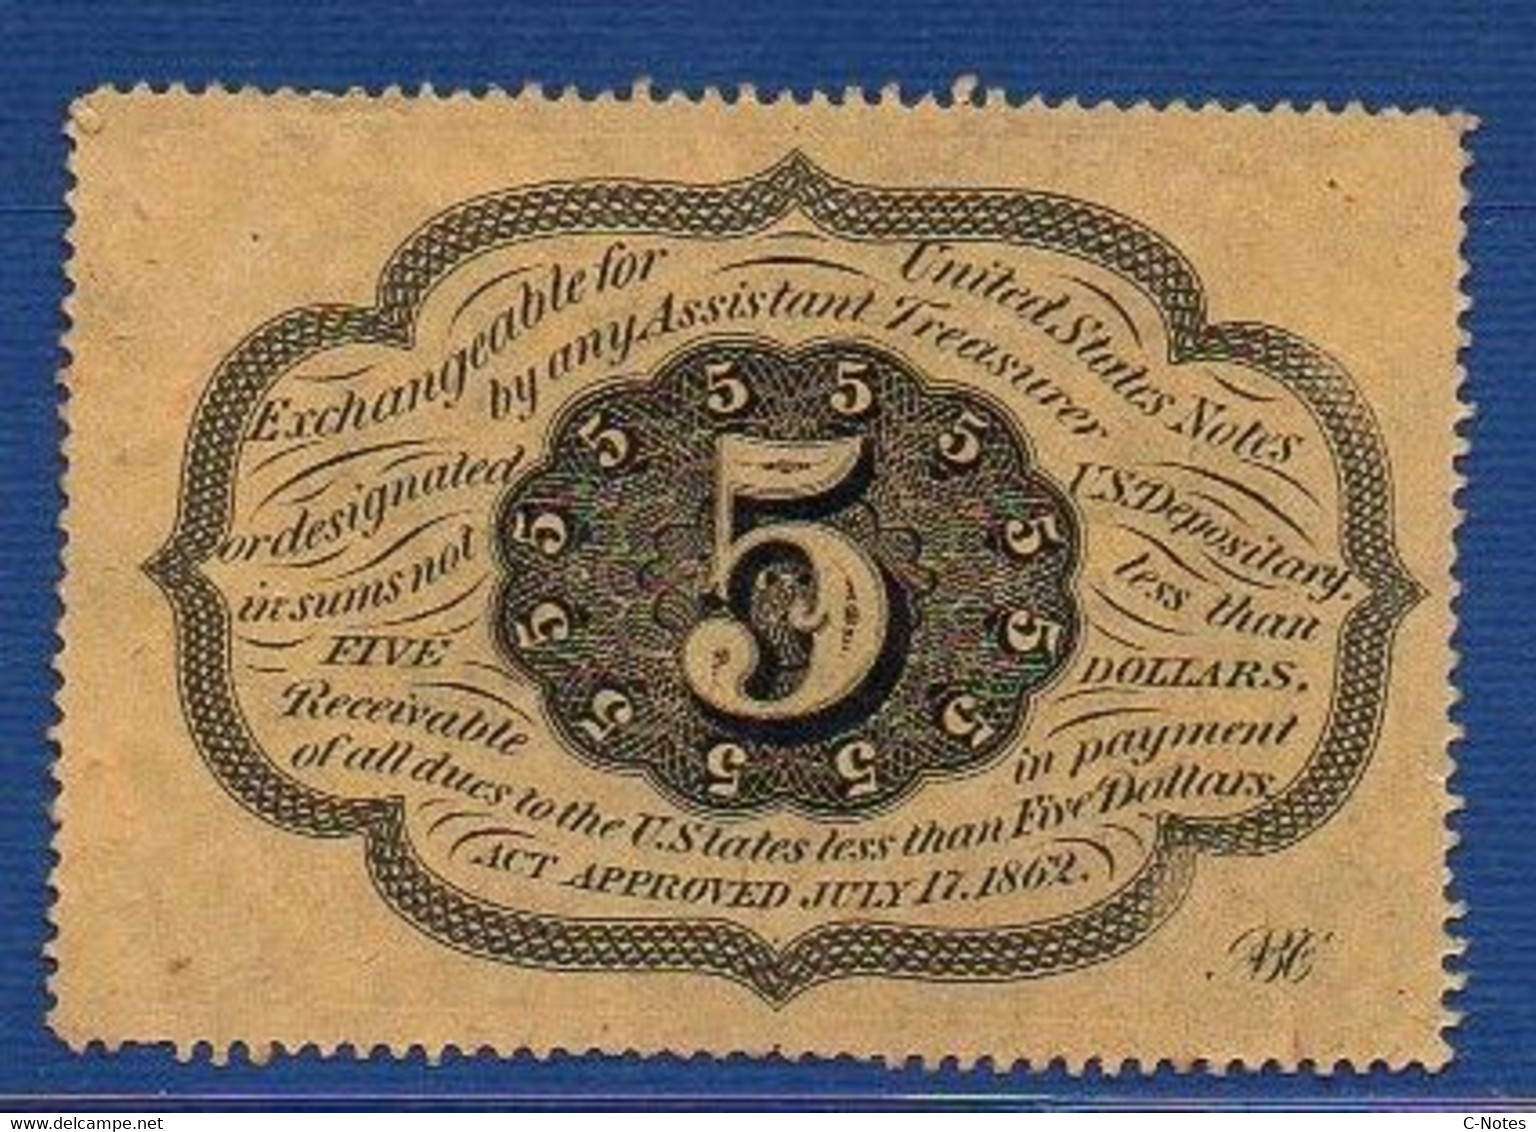 UNITED STATES OF AMERICA - P. 97a – 5 Cents 1862 AUNC, No Serial Number - 1862 : 1° Edizione